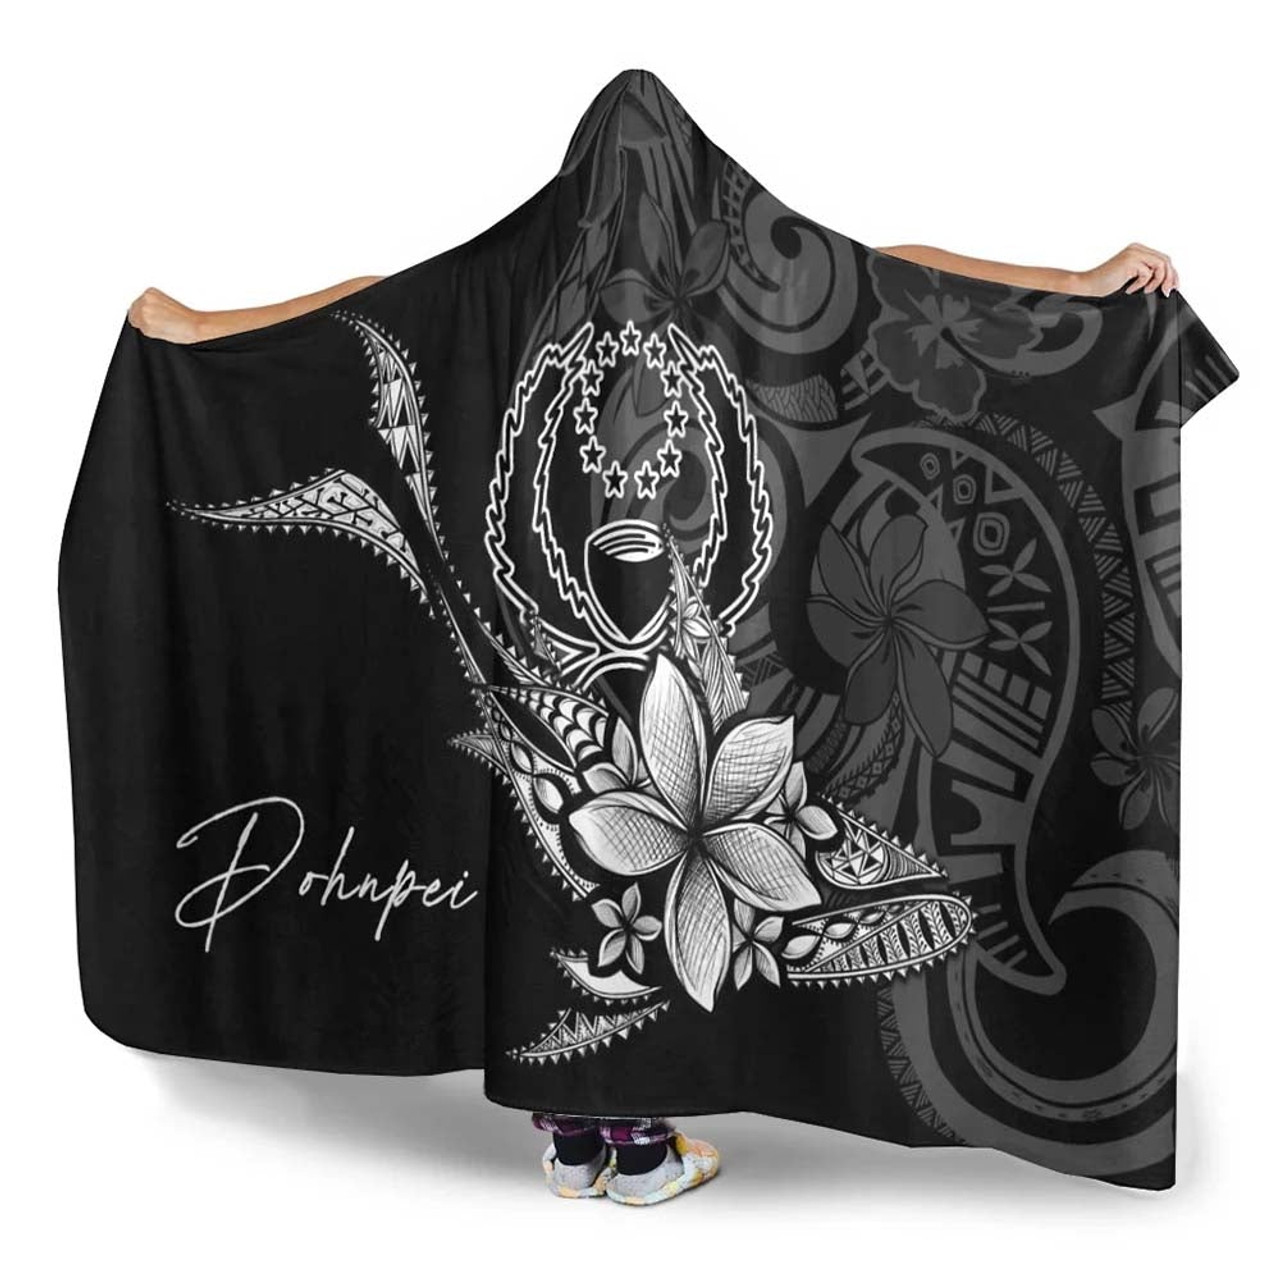 Pohnpei Hooded Blanket - Fish With Plumeria Flowers Style 3